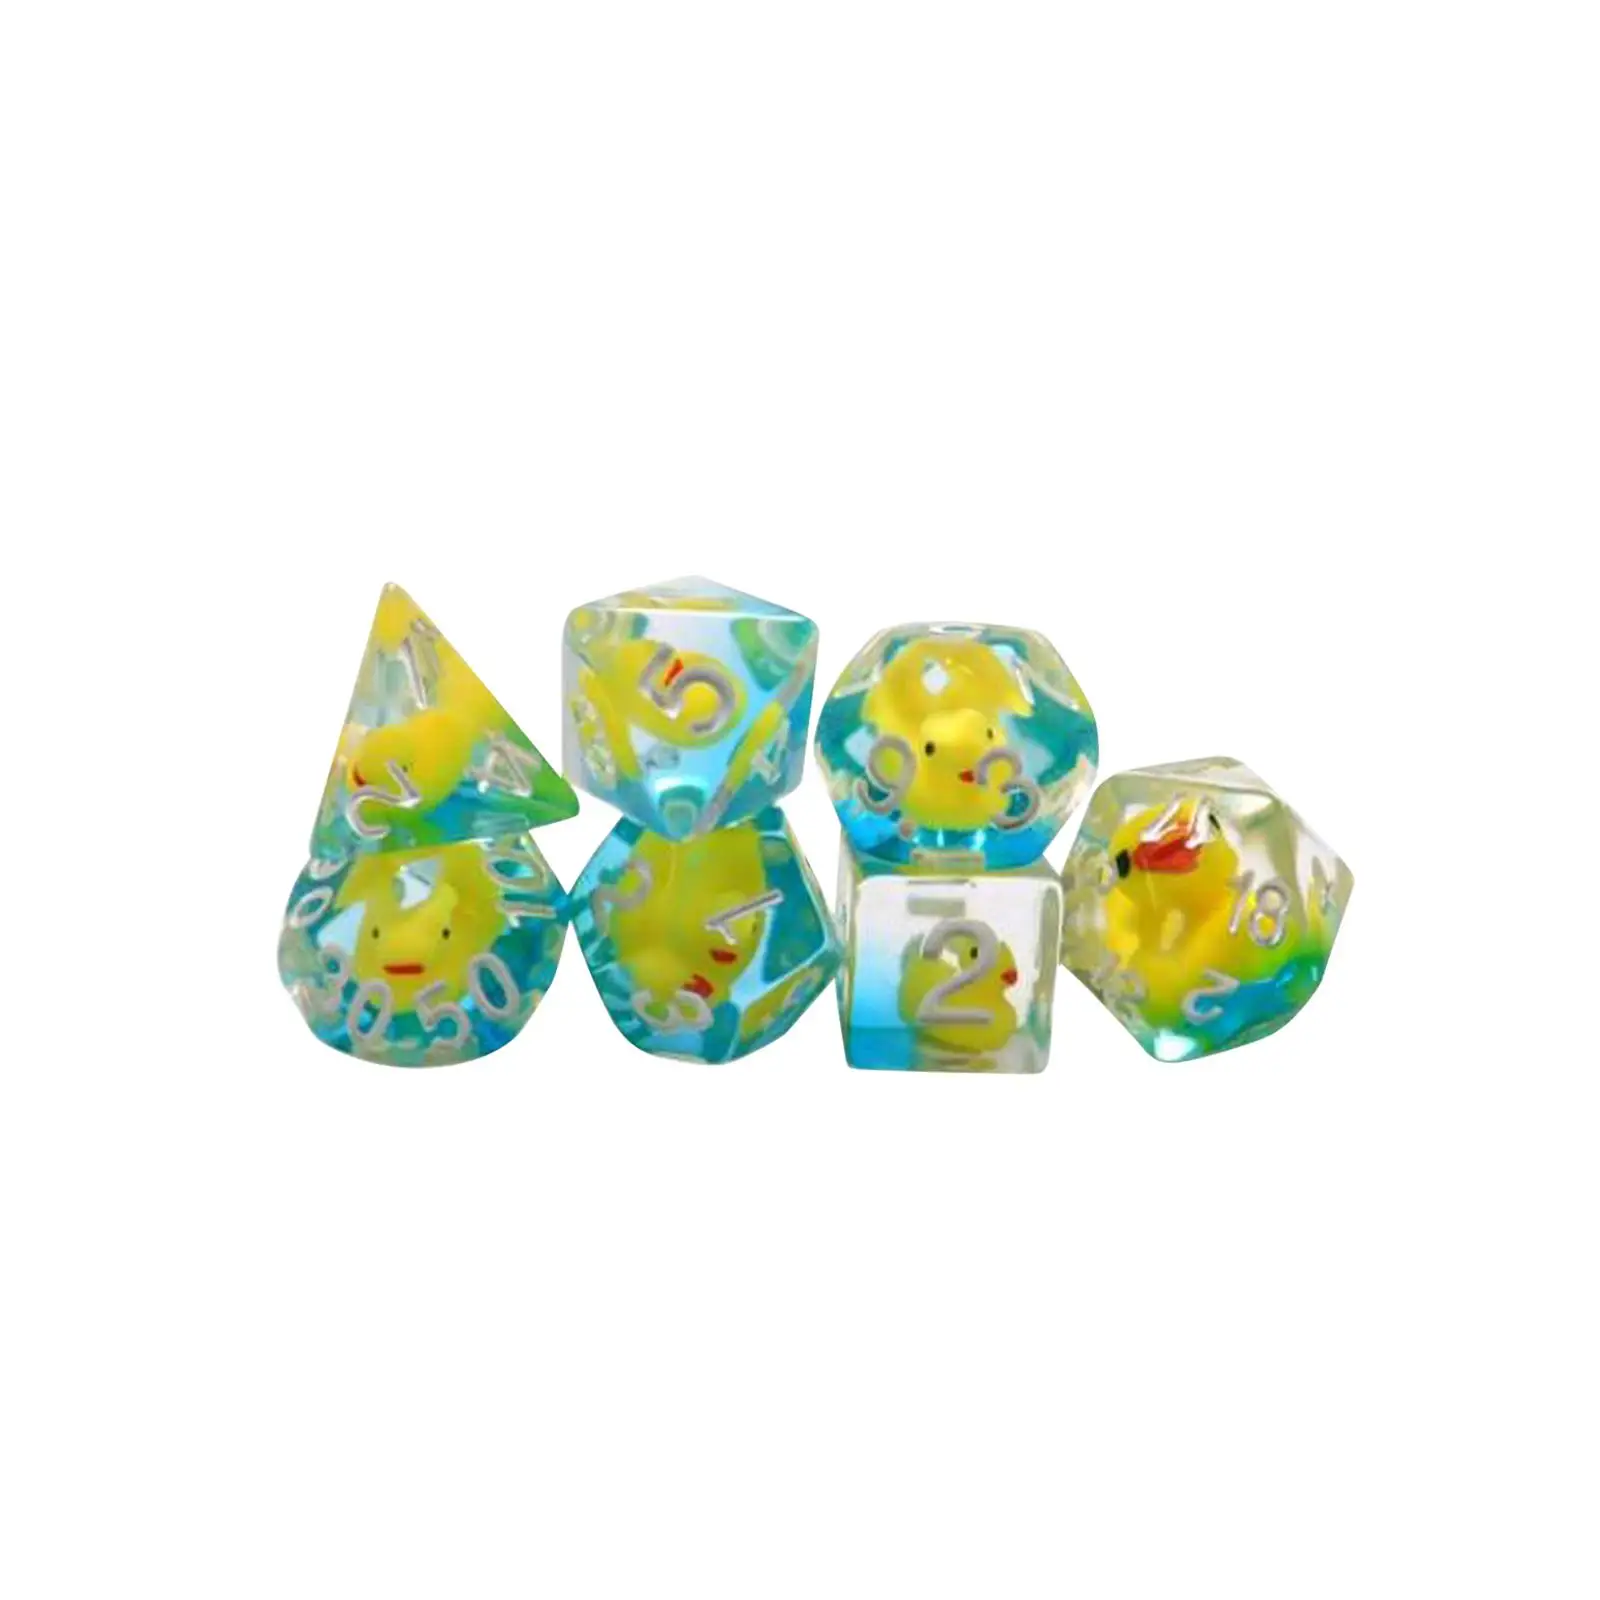 7x Multi Sided Dices D4 D8 D10 D12 D20 Filled with Ducks Party Supplies Polyhedral Dices Set for Bar Party Card Games Board Game